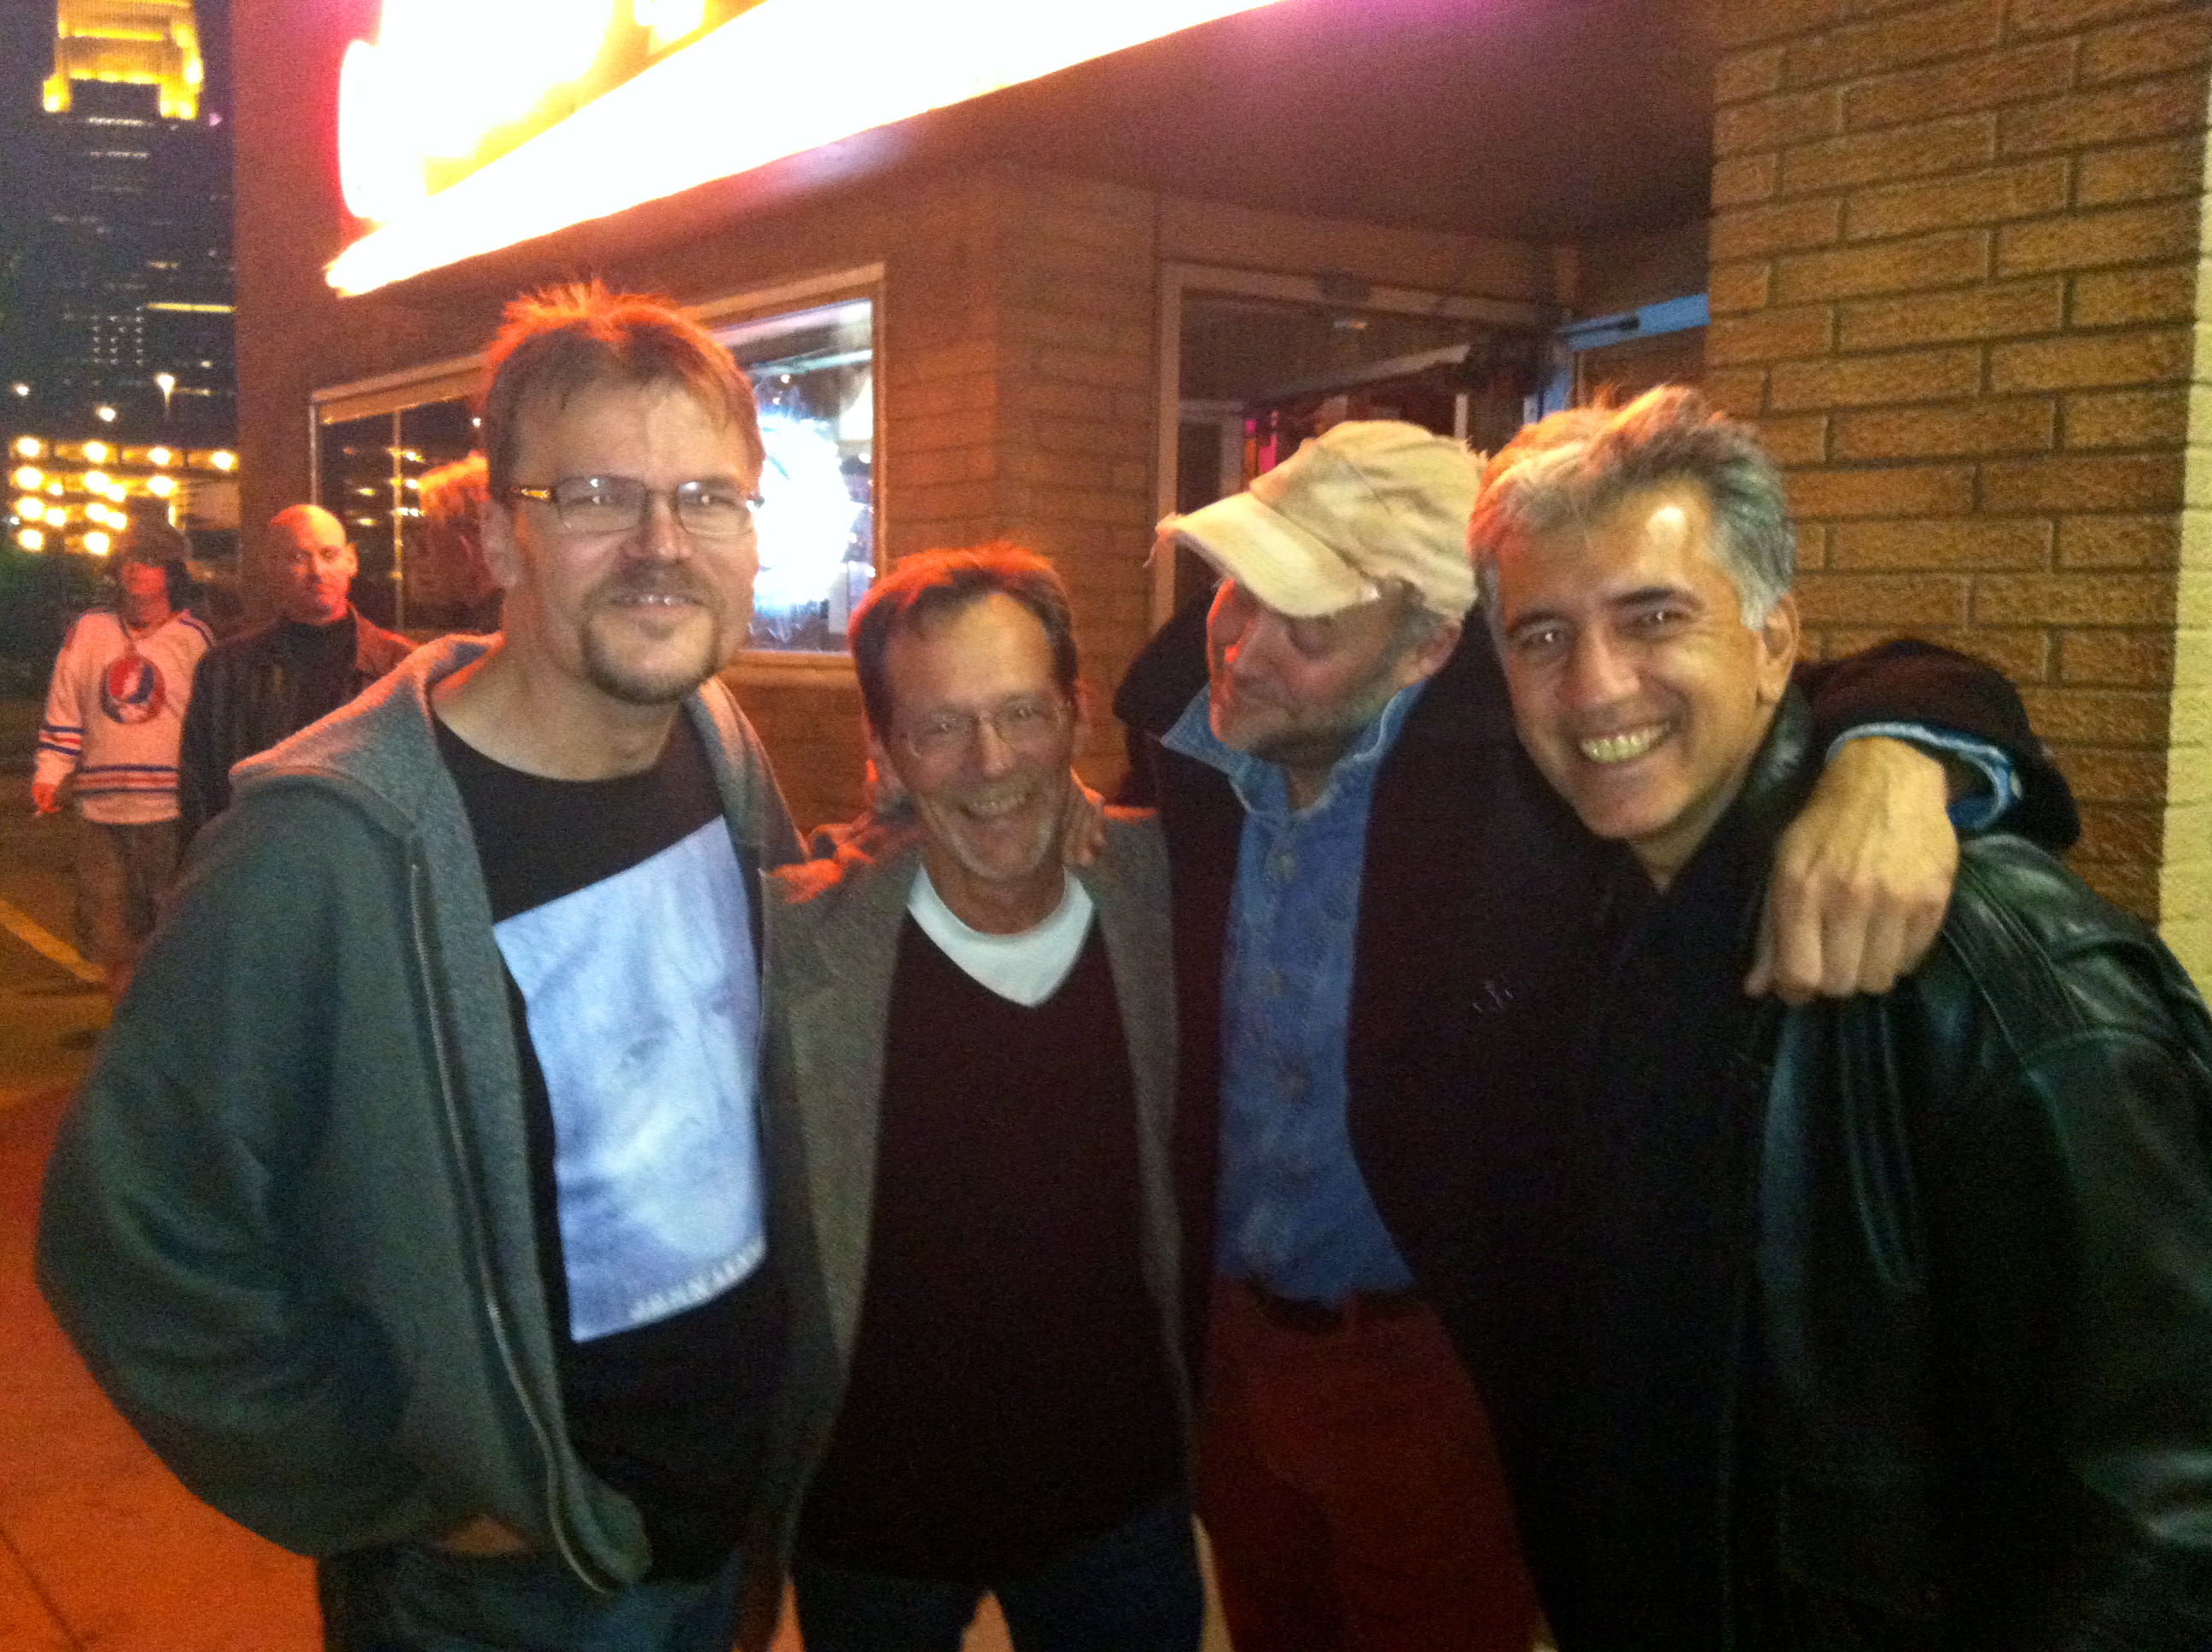 The Oarsmen, left to right, Kevin Featherly, Mike Olk, Barron Whittet and Scott Maida, outside Lee's Liquor Lounge, where the benefit will be held. Photo by Dave Wildermuth.